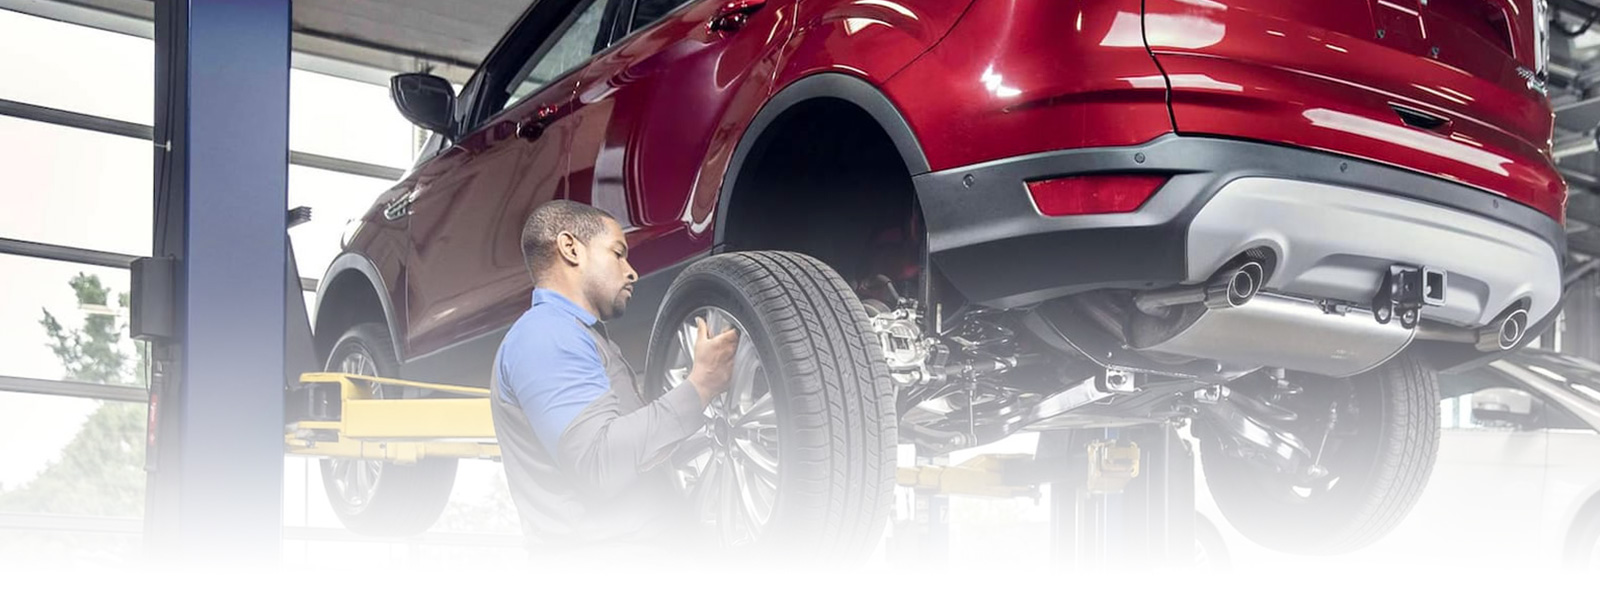 Unique Auto Care offers a wide range of services to Victorville, CA and surrounding areas.